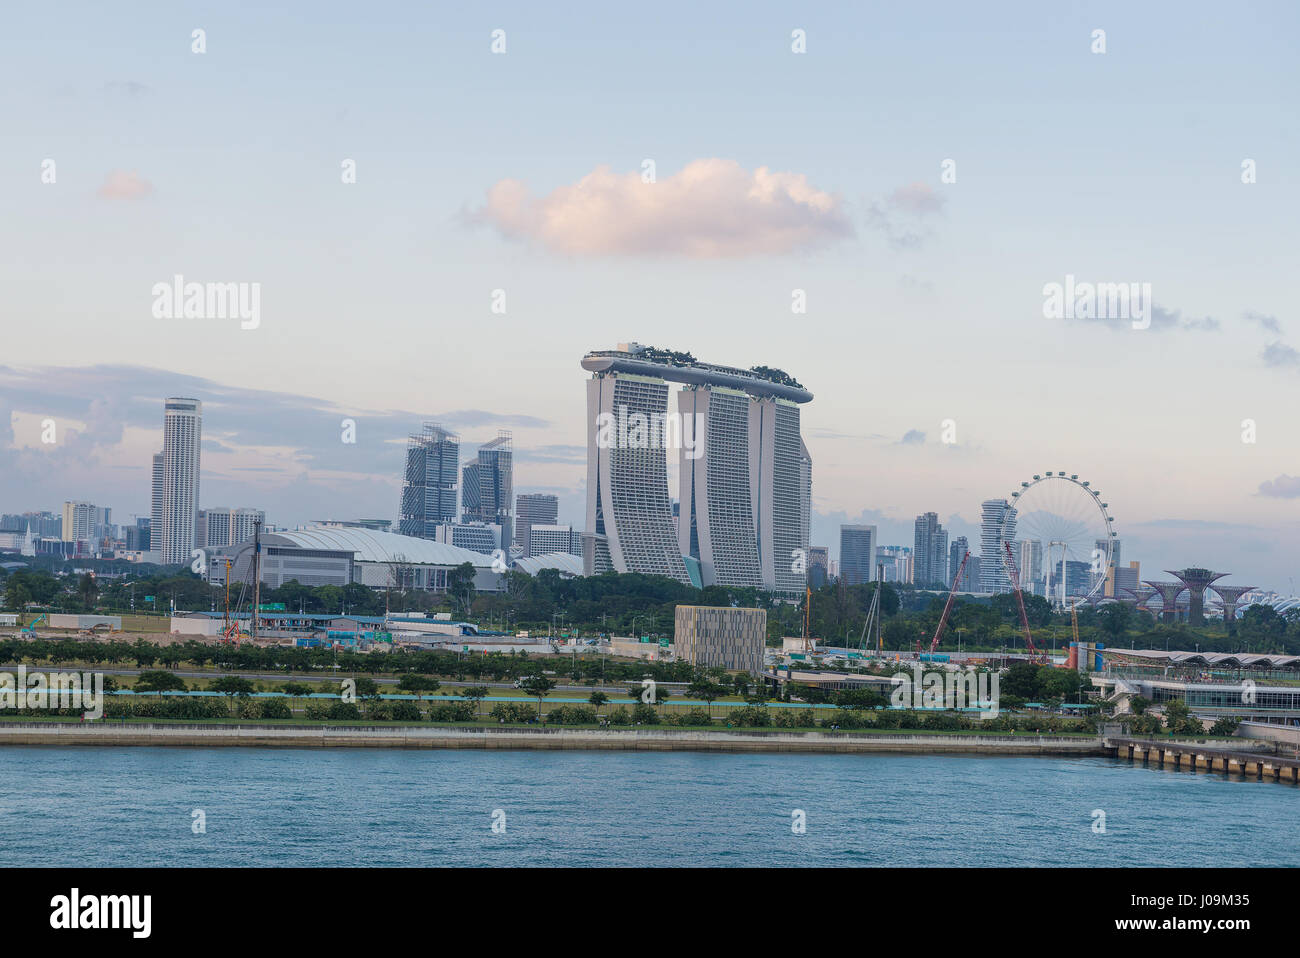 skyline of Singapore with city central business district at the sunset Stock Photo